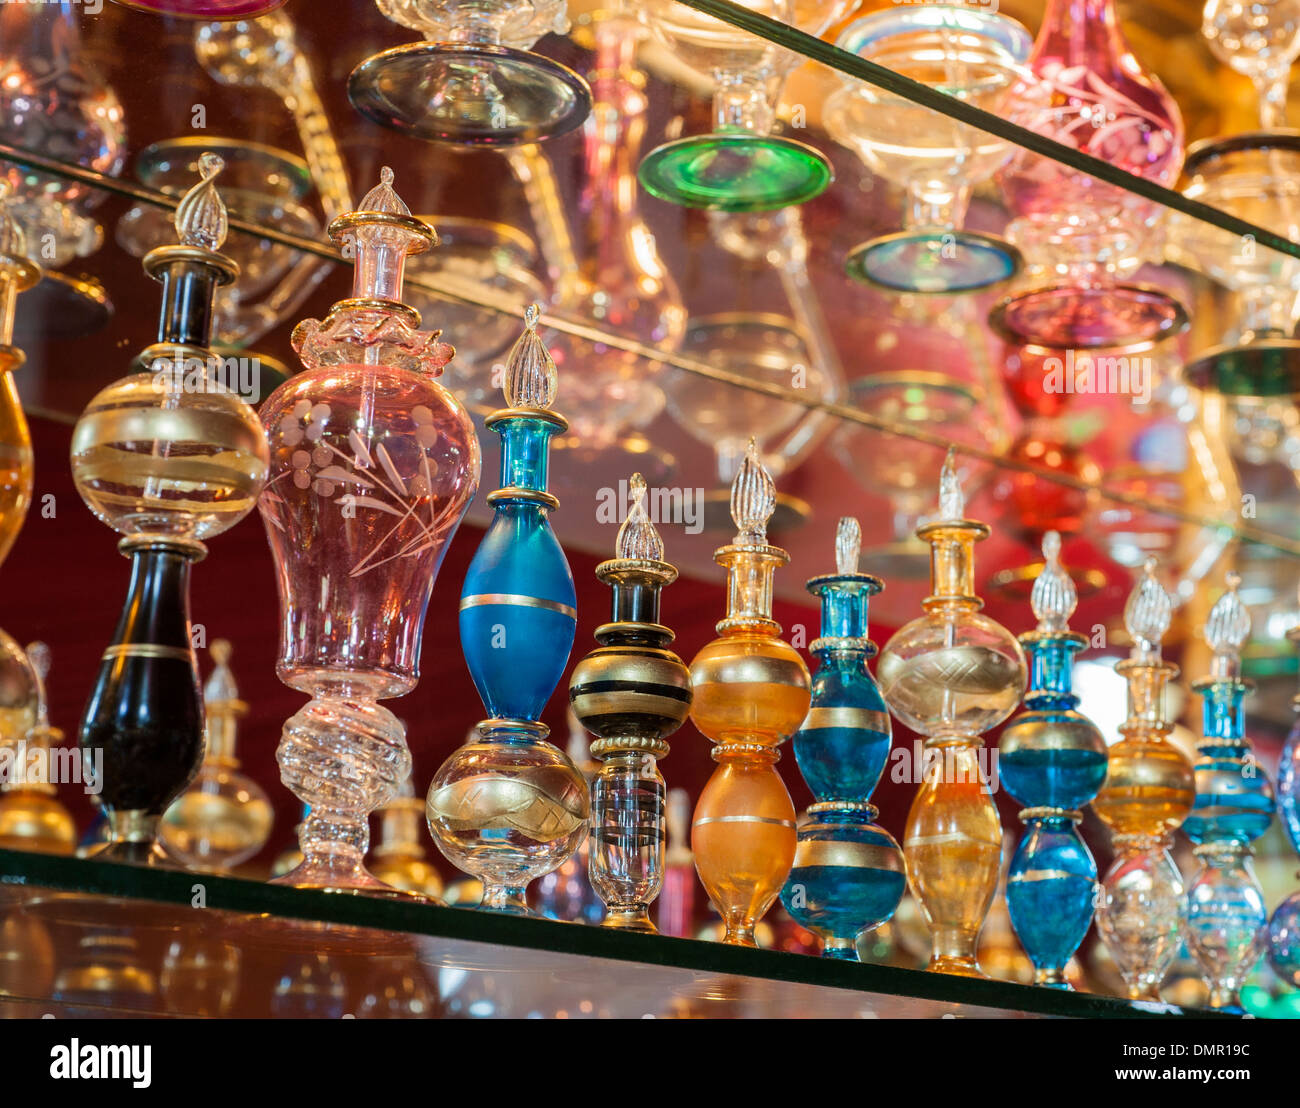 Rows of ornate multicolored perfume bottles on a shelf in egyptian bazaar shop Stock Photo